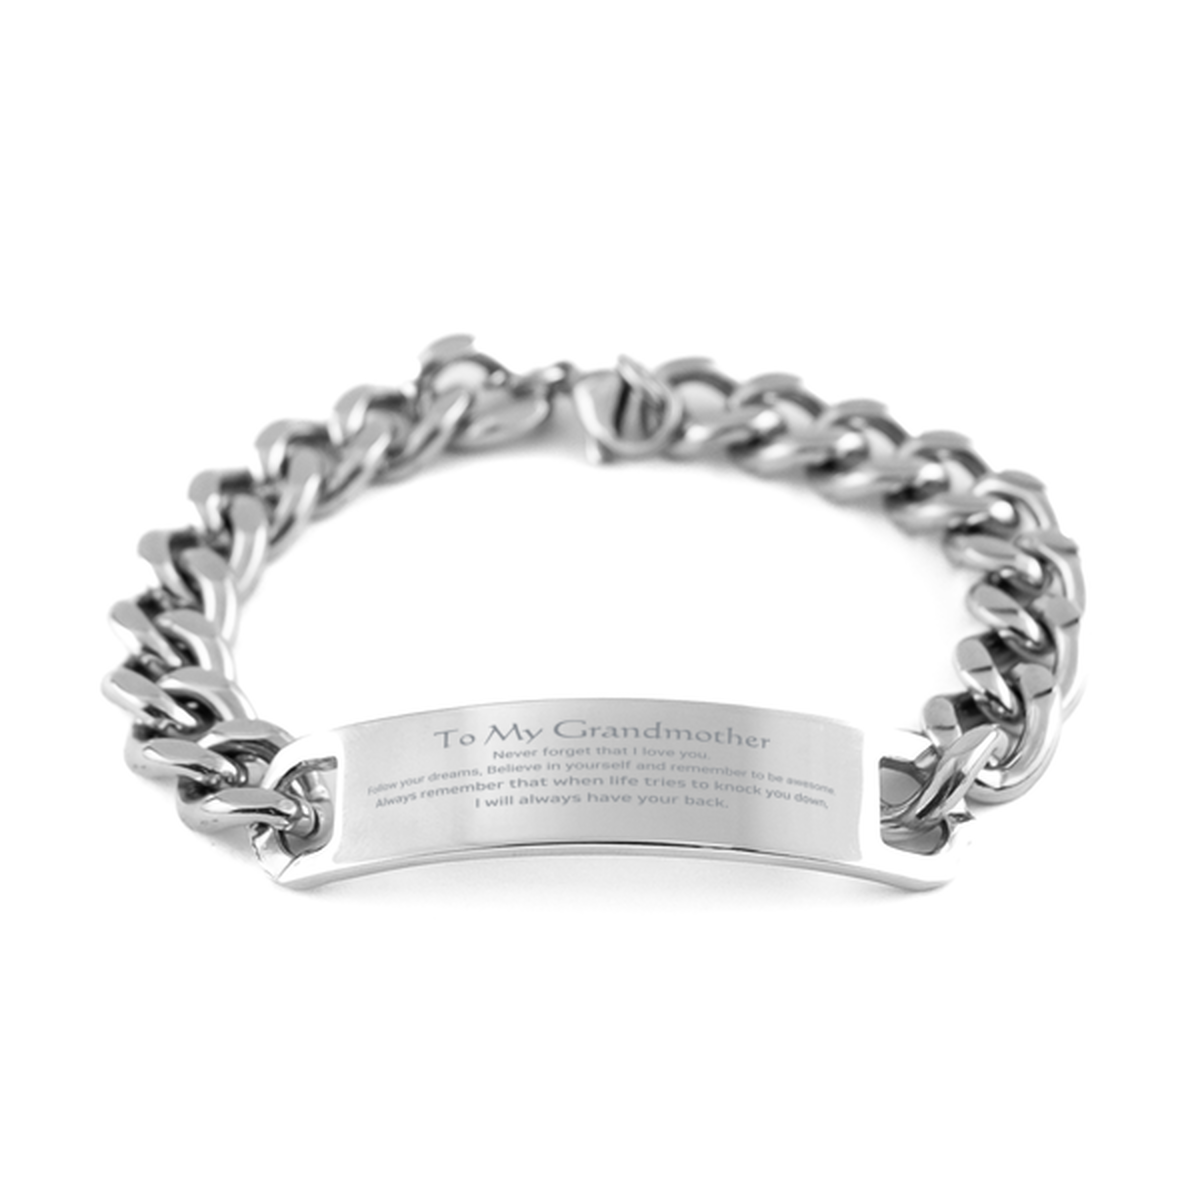 Inspirational Gifts for Grandmother, Follow your dreams, Believe in yourself, Grandmother Cuban Chain Stainless Steel Bracelet, Birthday Christmas Unique Gifts For Grandmother